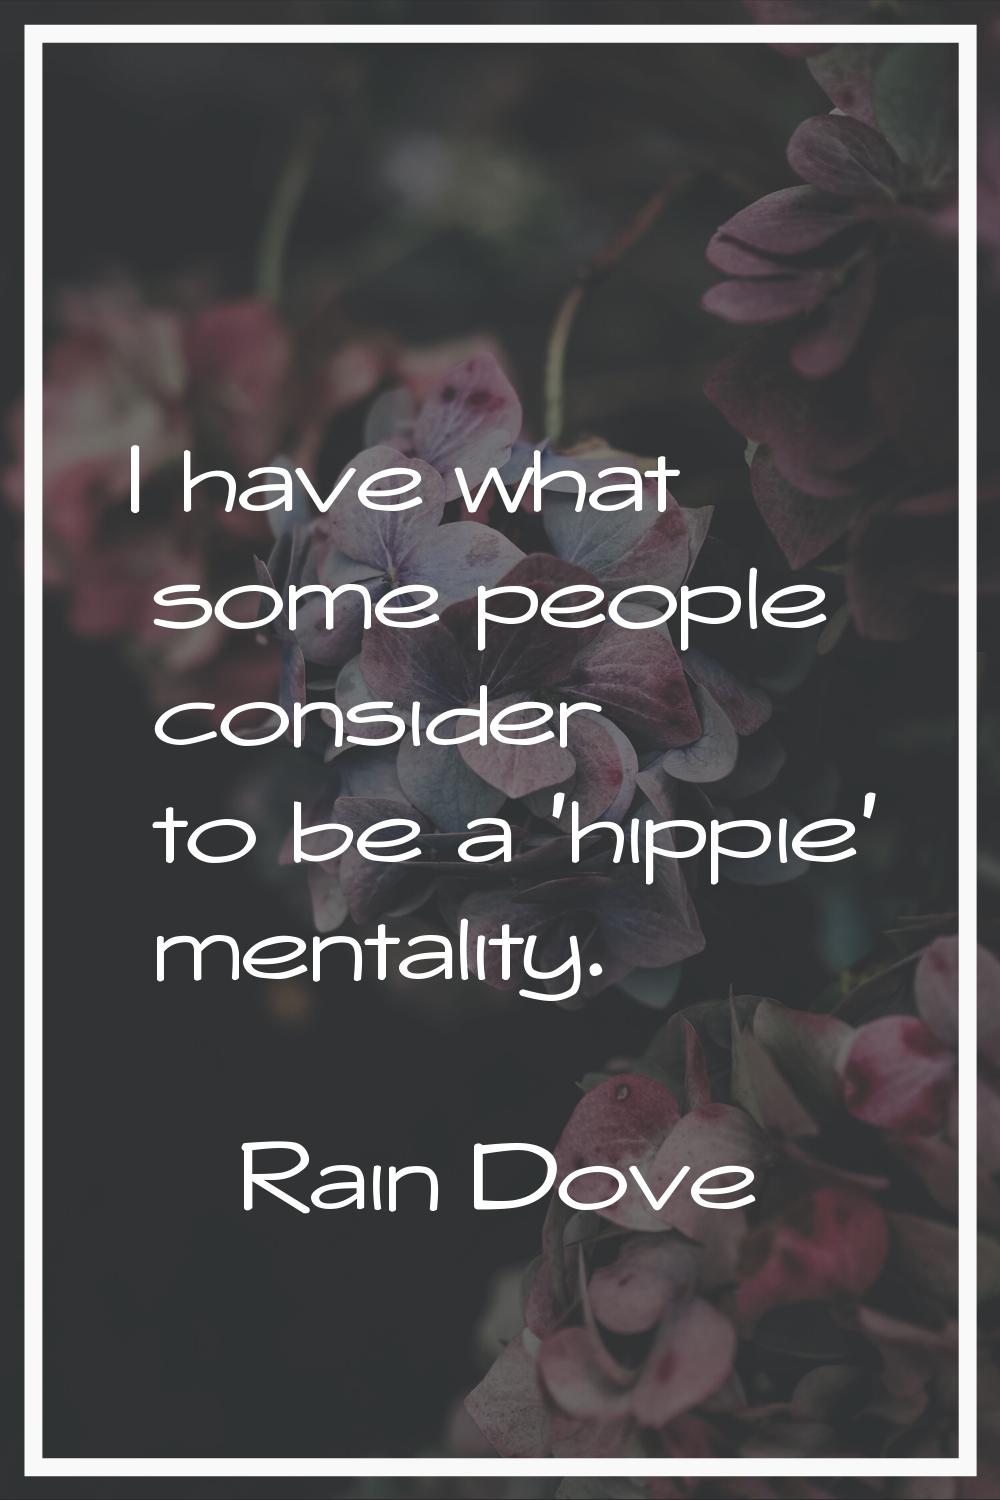 I have what some people consider to be a 'hippie' mentality.